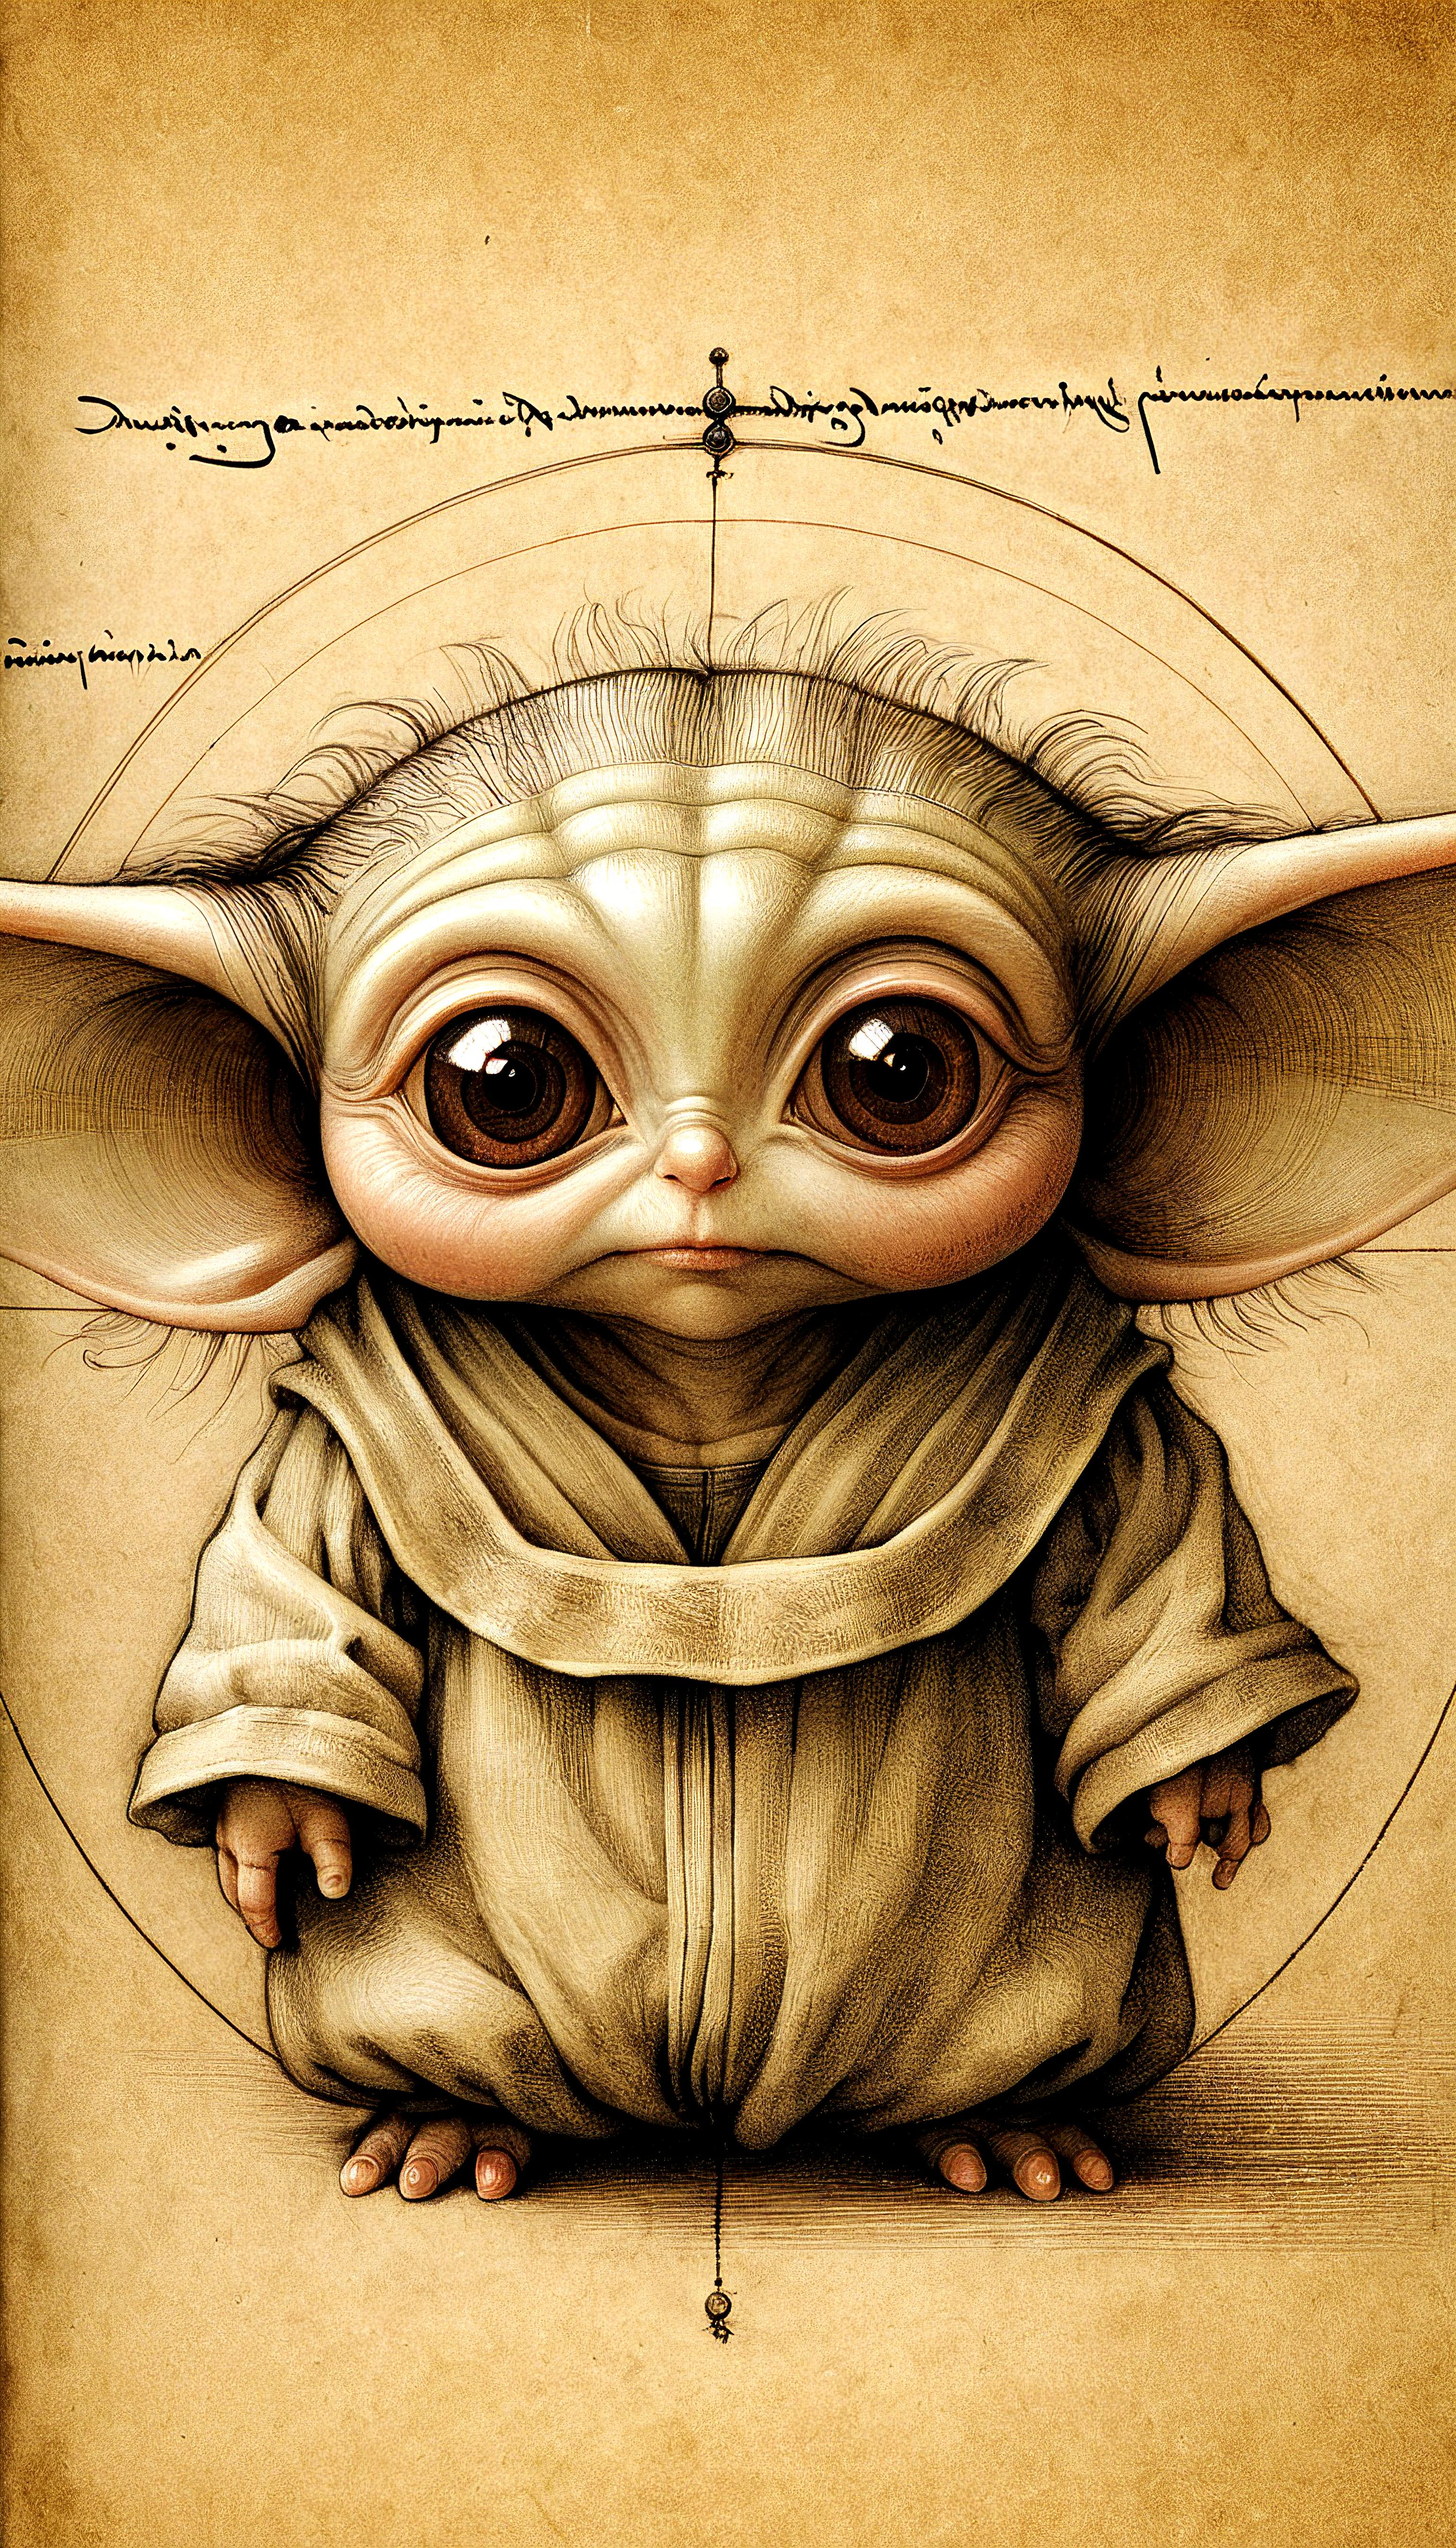 A cute illustration of a young baby Yoda.